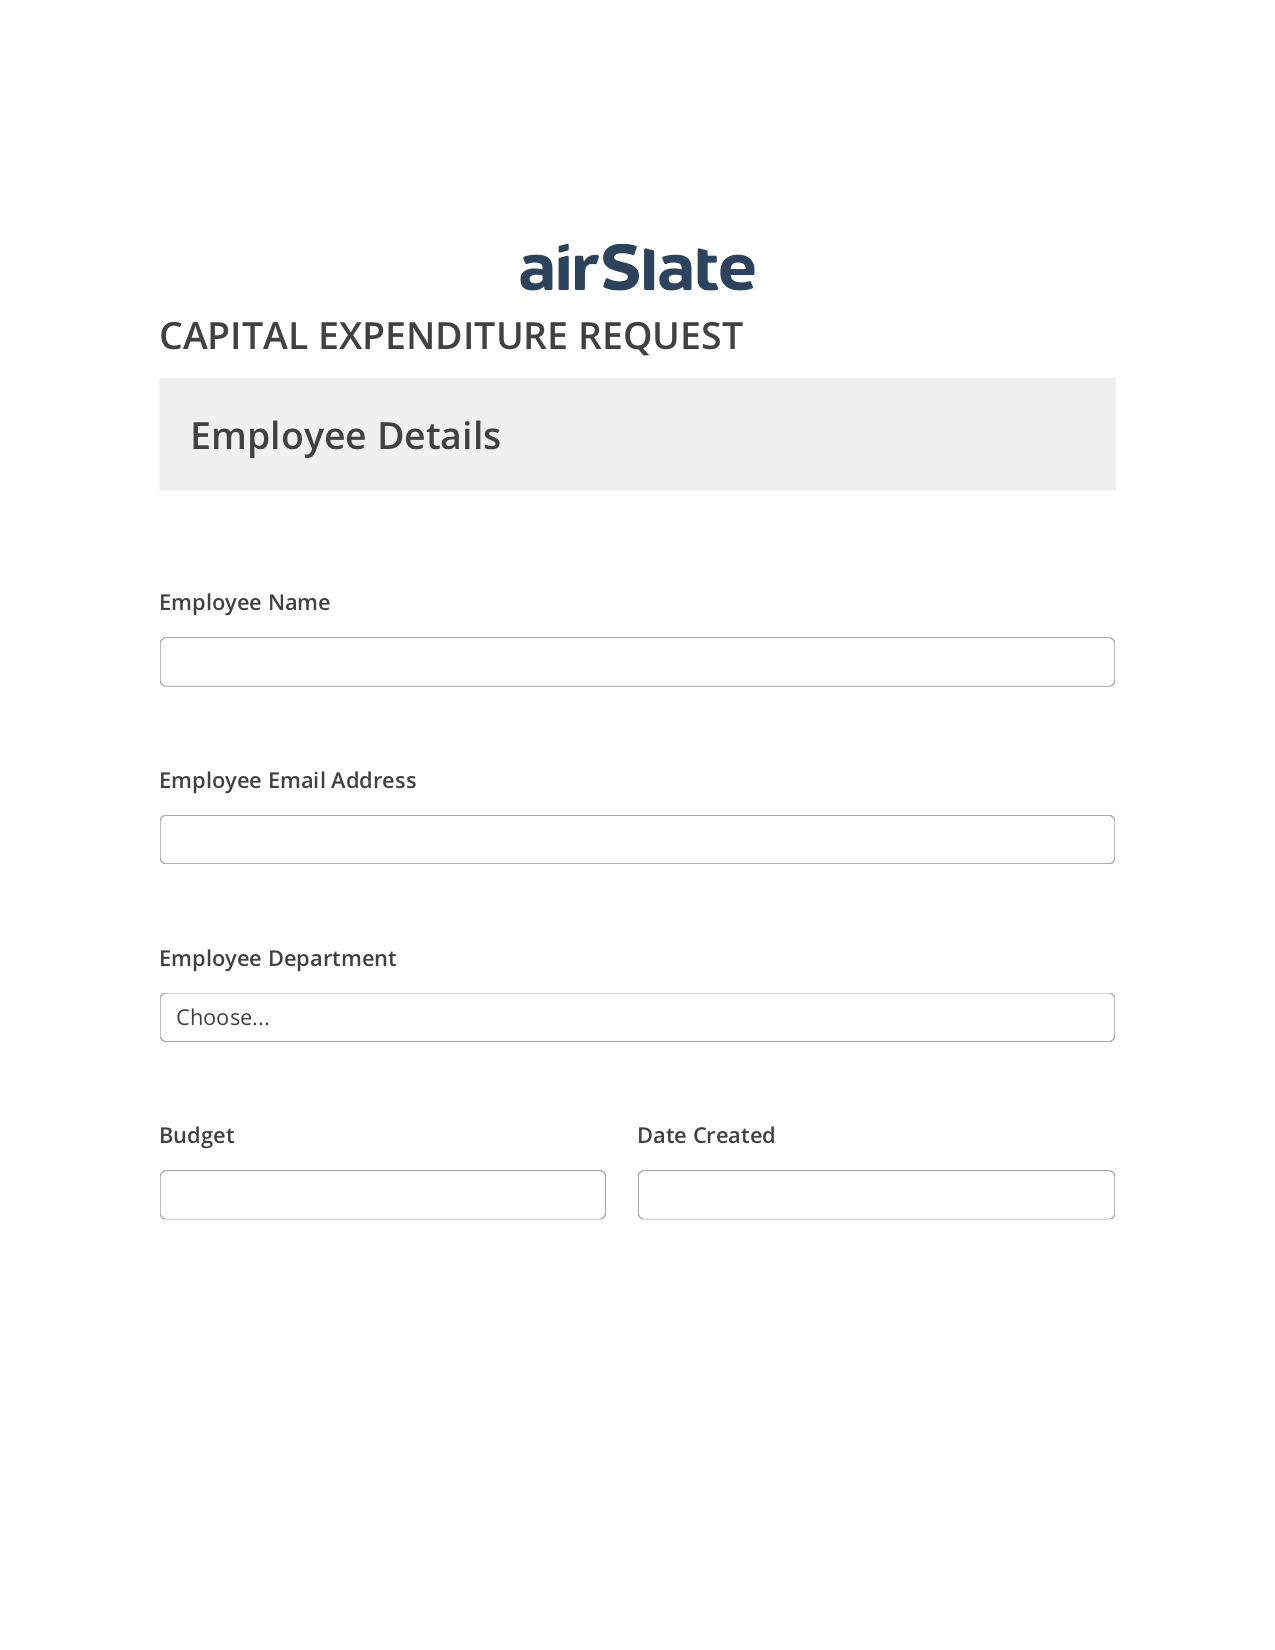 Capital Expenditure Request Approval Workflow Pre-fill from Google Sheets Bot, Create Slate every Google Sheet Update Bot, Archive to SharePoint Folder Bot